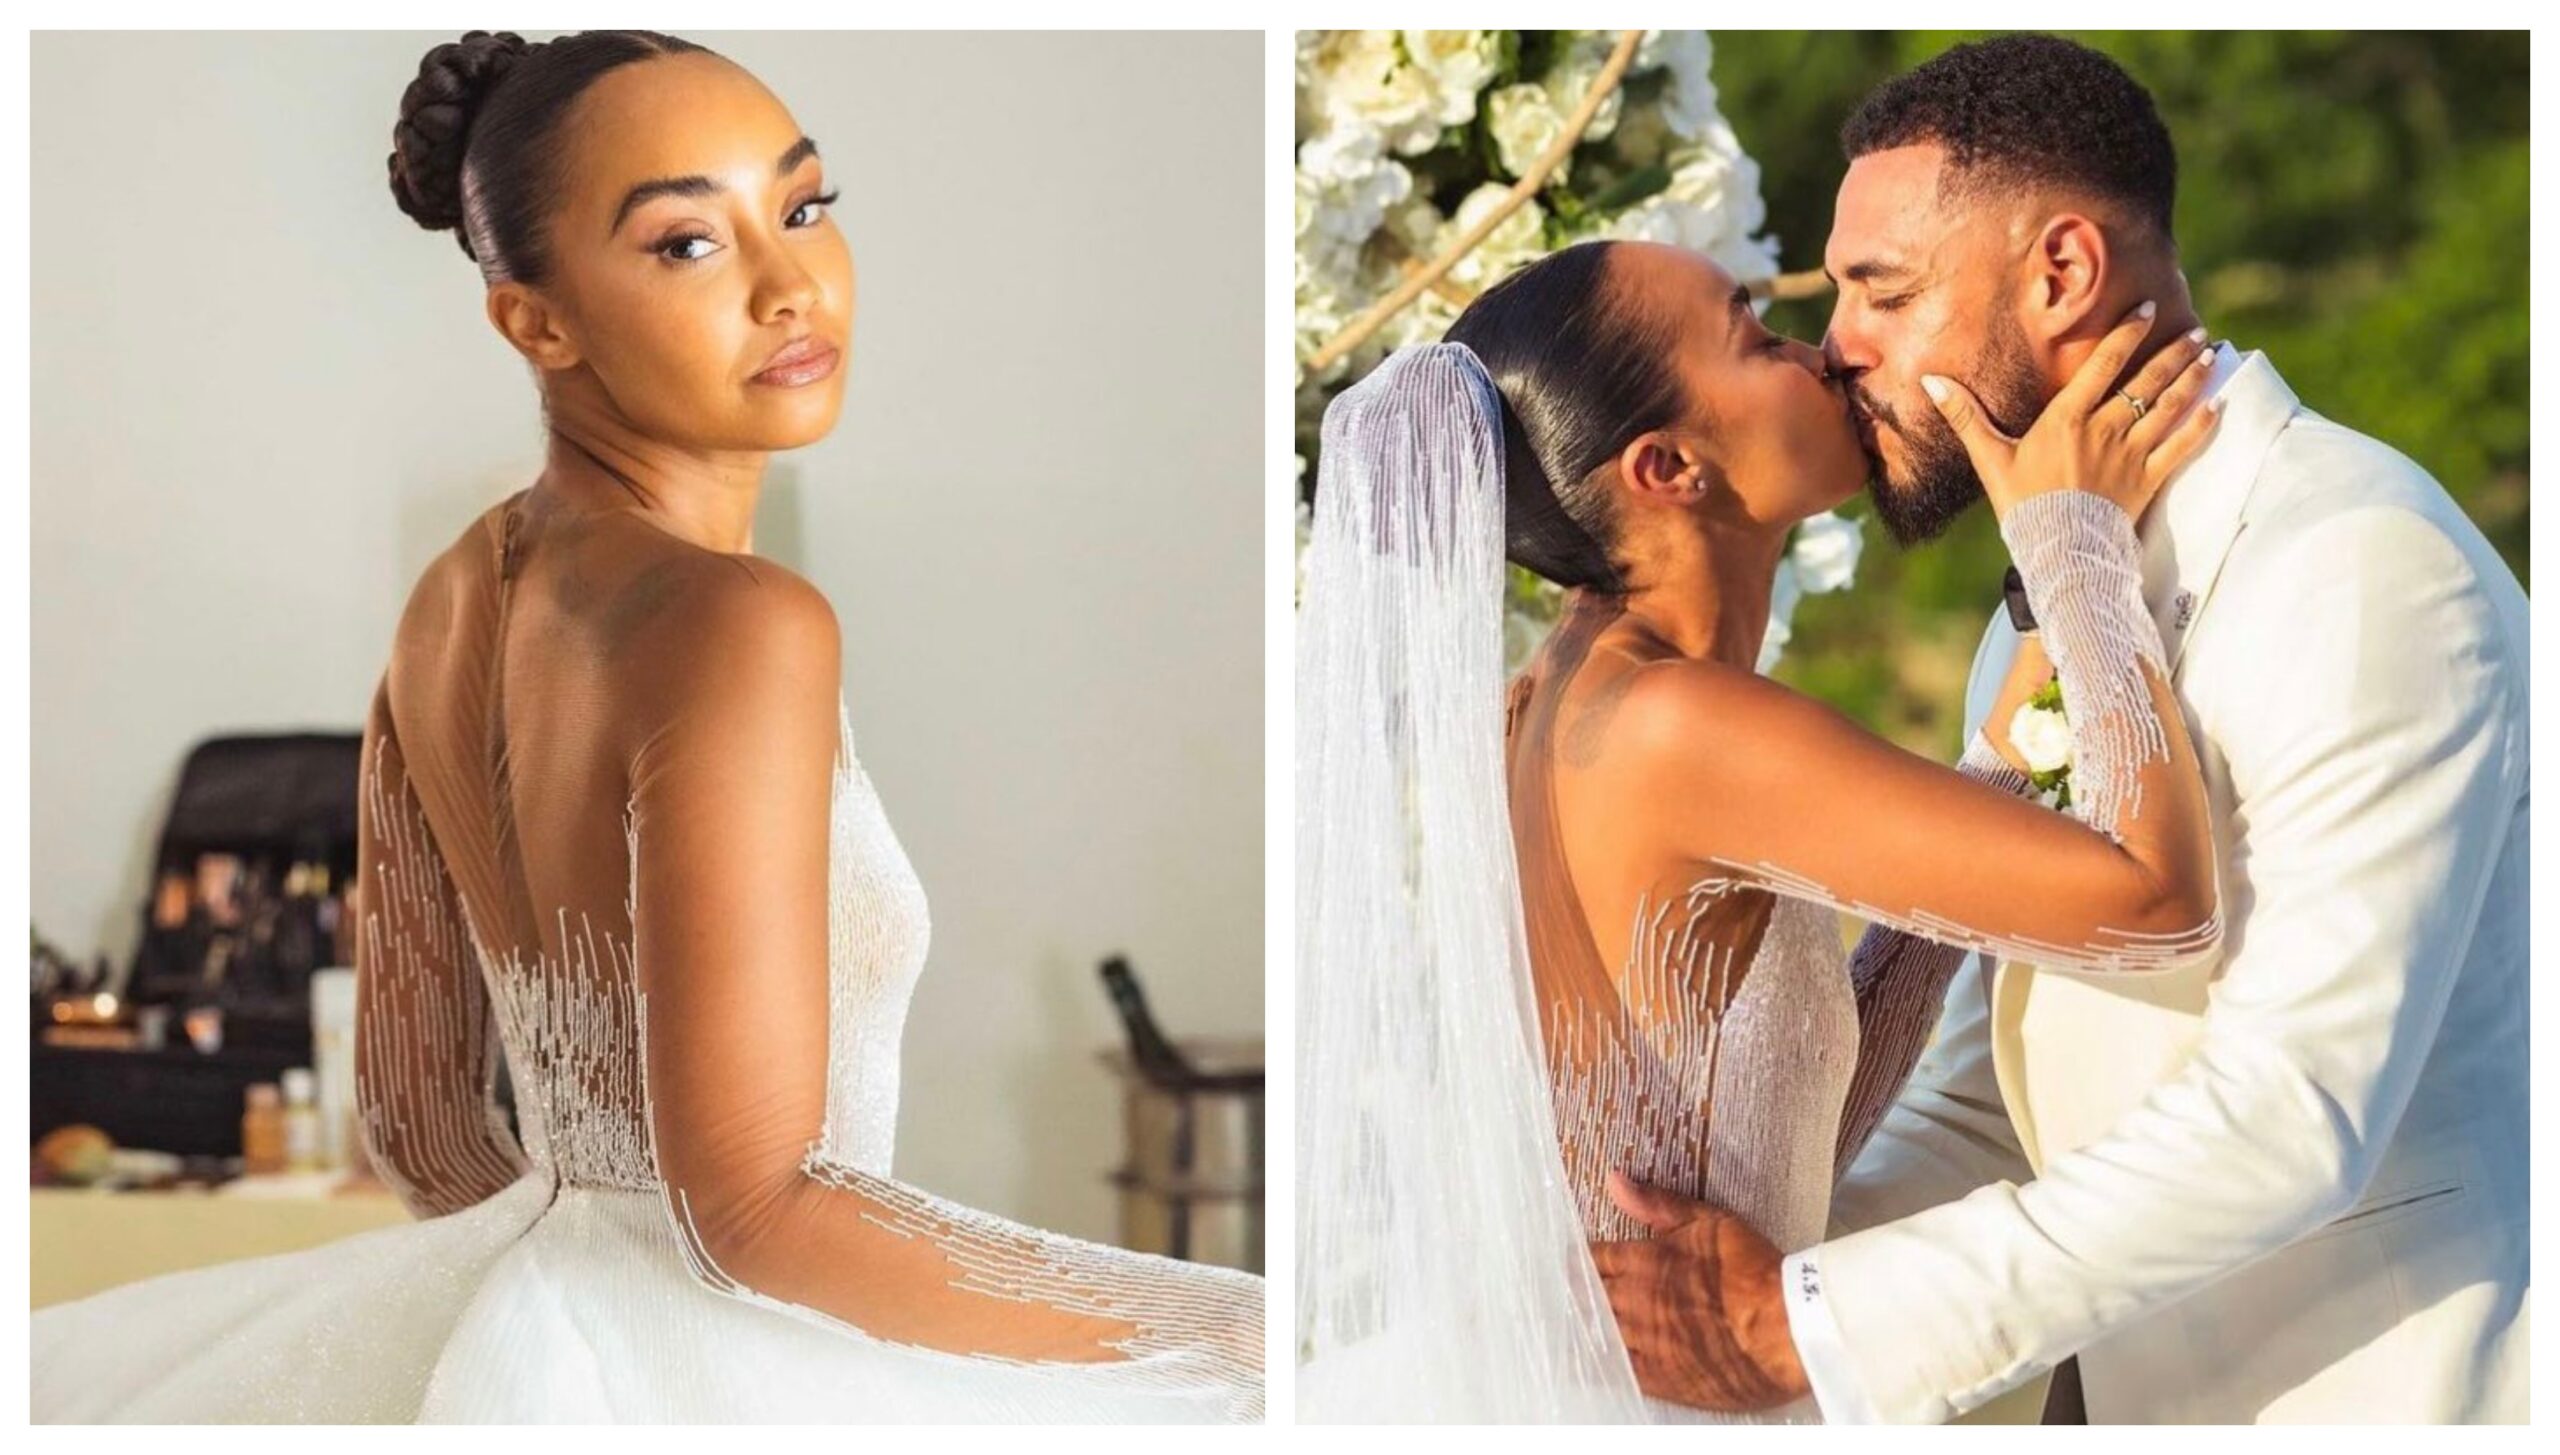 Leigh-Anne Pinnock & Andre Gray Share Wedding Pictures: “I Married My Soul Mate”